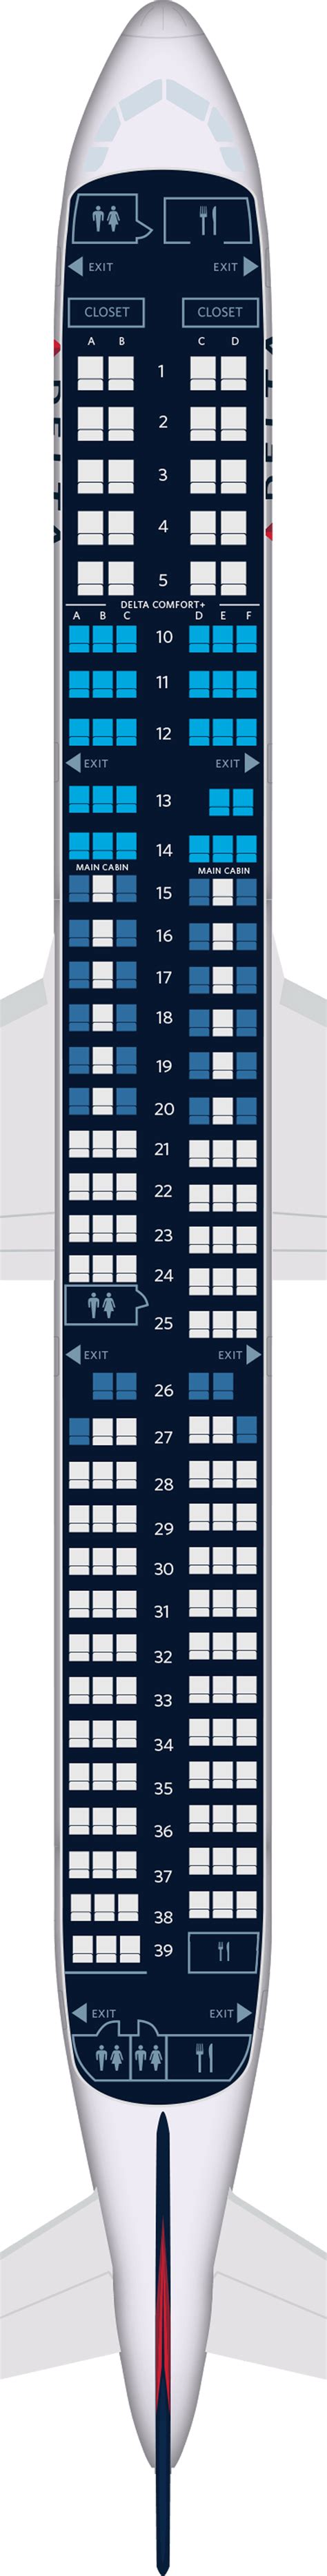 Based on the Delta Airbus A321 seat map, from rows 10 to 14 are Delta Comfort+ seats. This cabin’s first row of seats is too close to the bulkhead, limiting space for passengers to stretch their legs. There is a 3-3 configuration for rows 10, 11, and 12 and an exit row behind the seats.. 